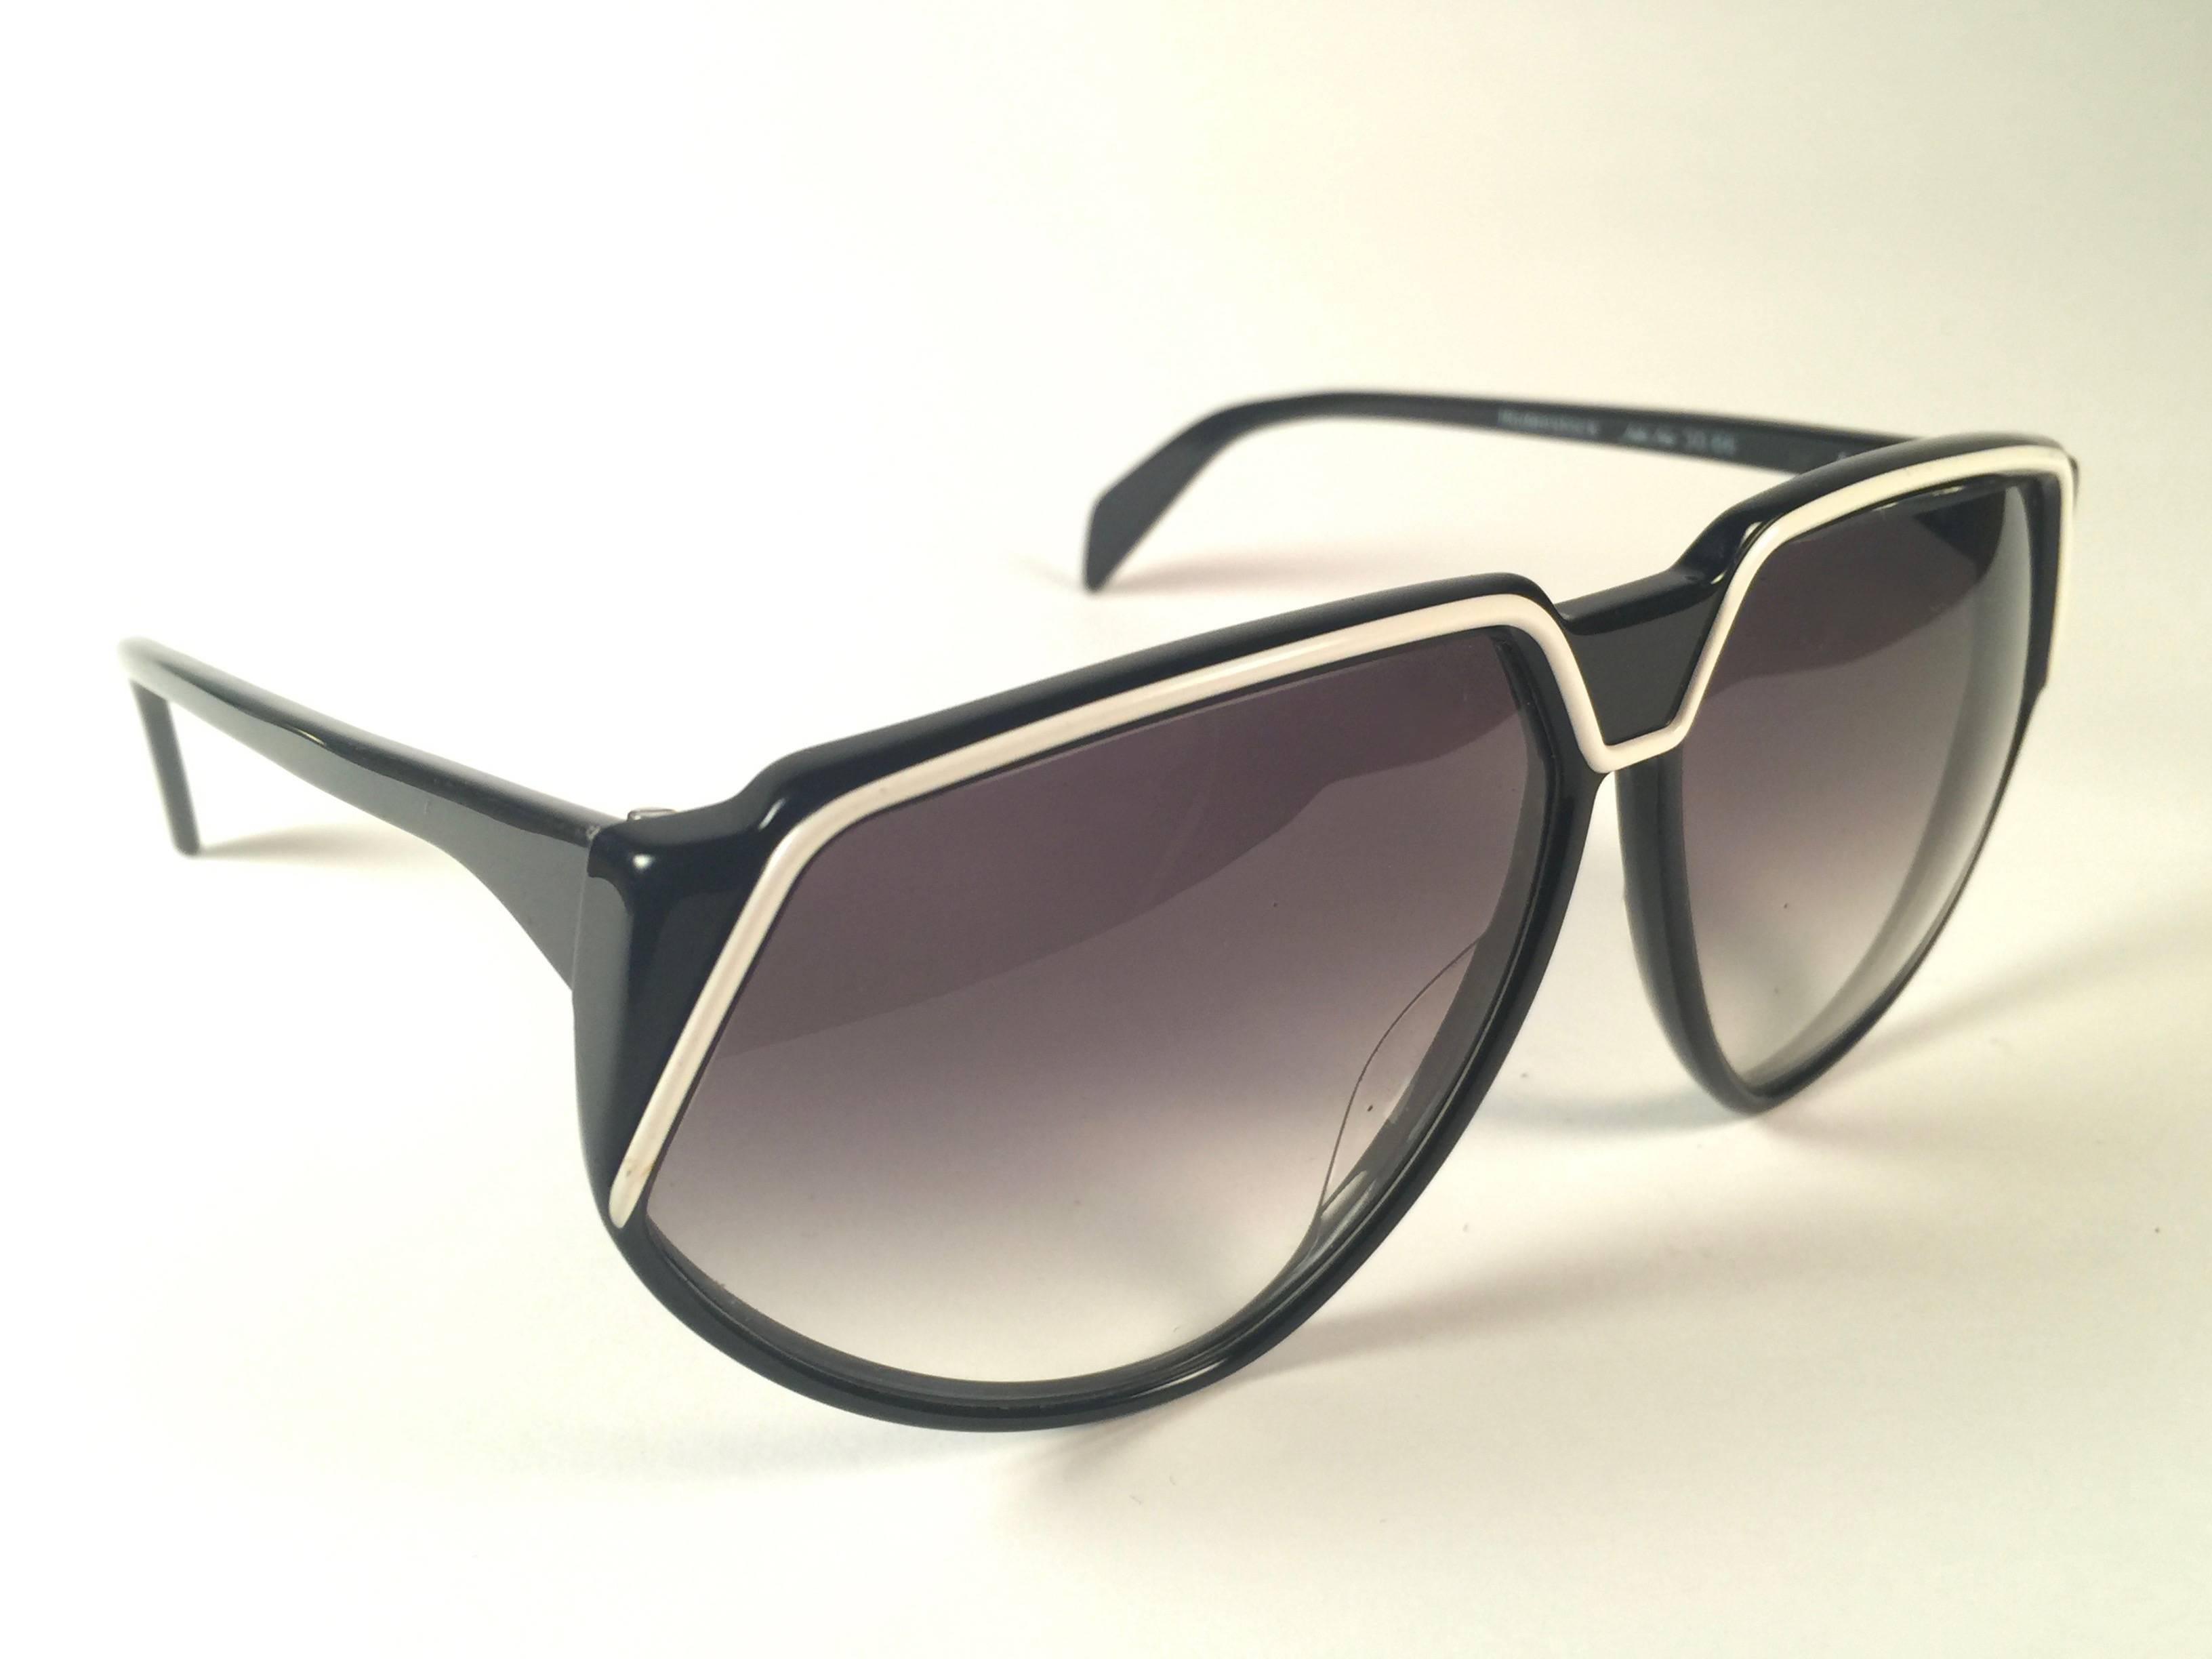 New Vintage Rodenstock sunglasses. 
Black and White frame sporting a pair of grey gradient lenses.  
Never worn or displayed. This item may show minor sign of wear due to nearly 40 years of storage.  
Designed and produced in Germany.